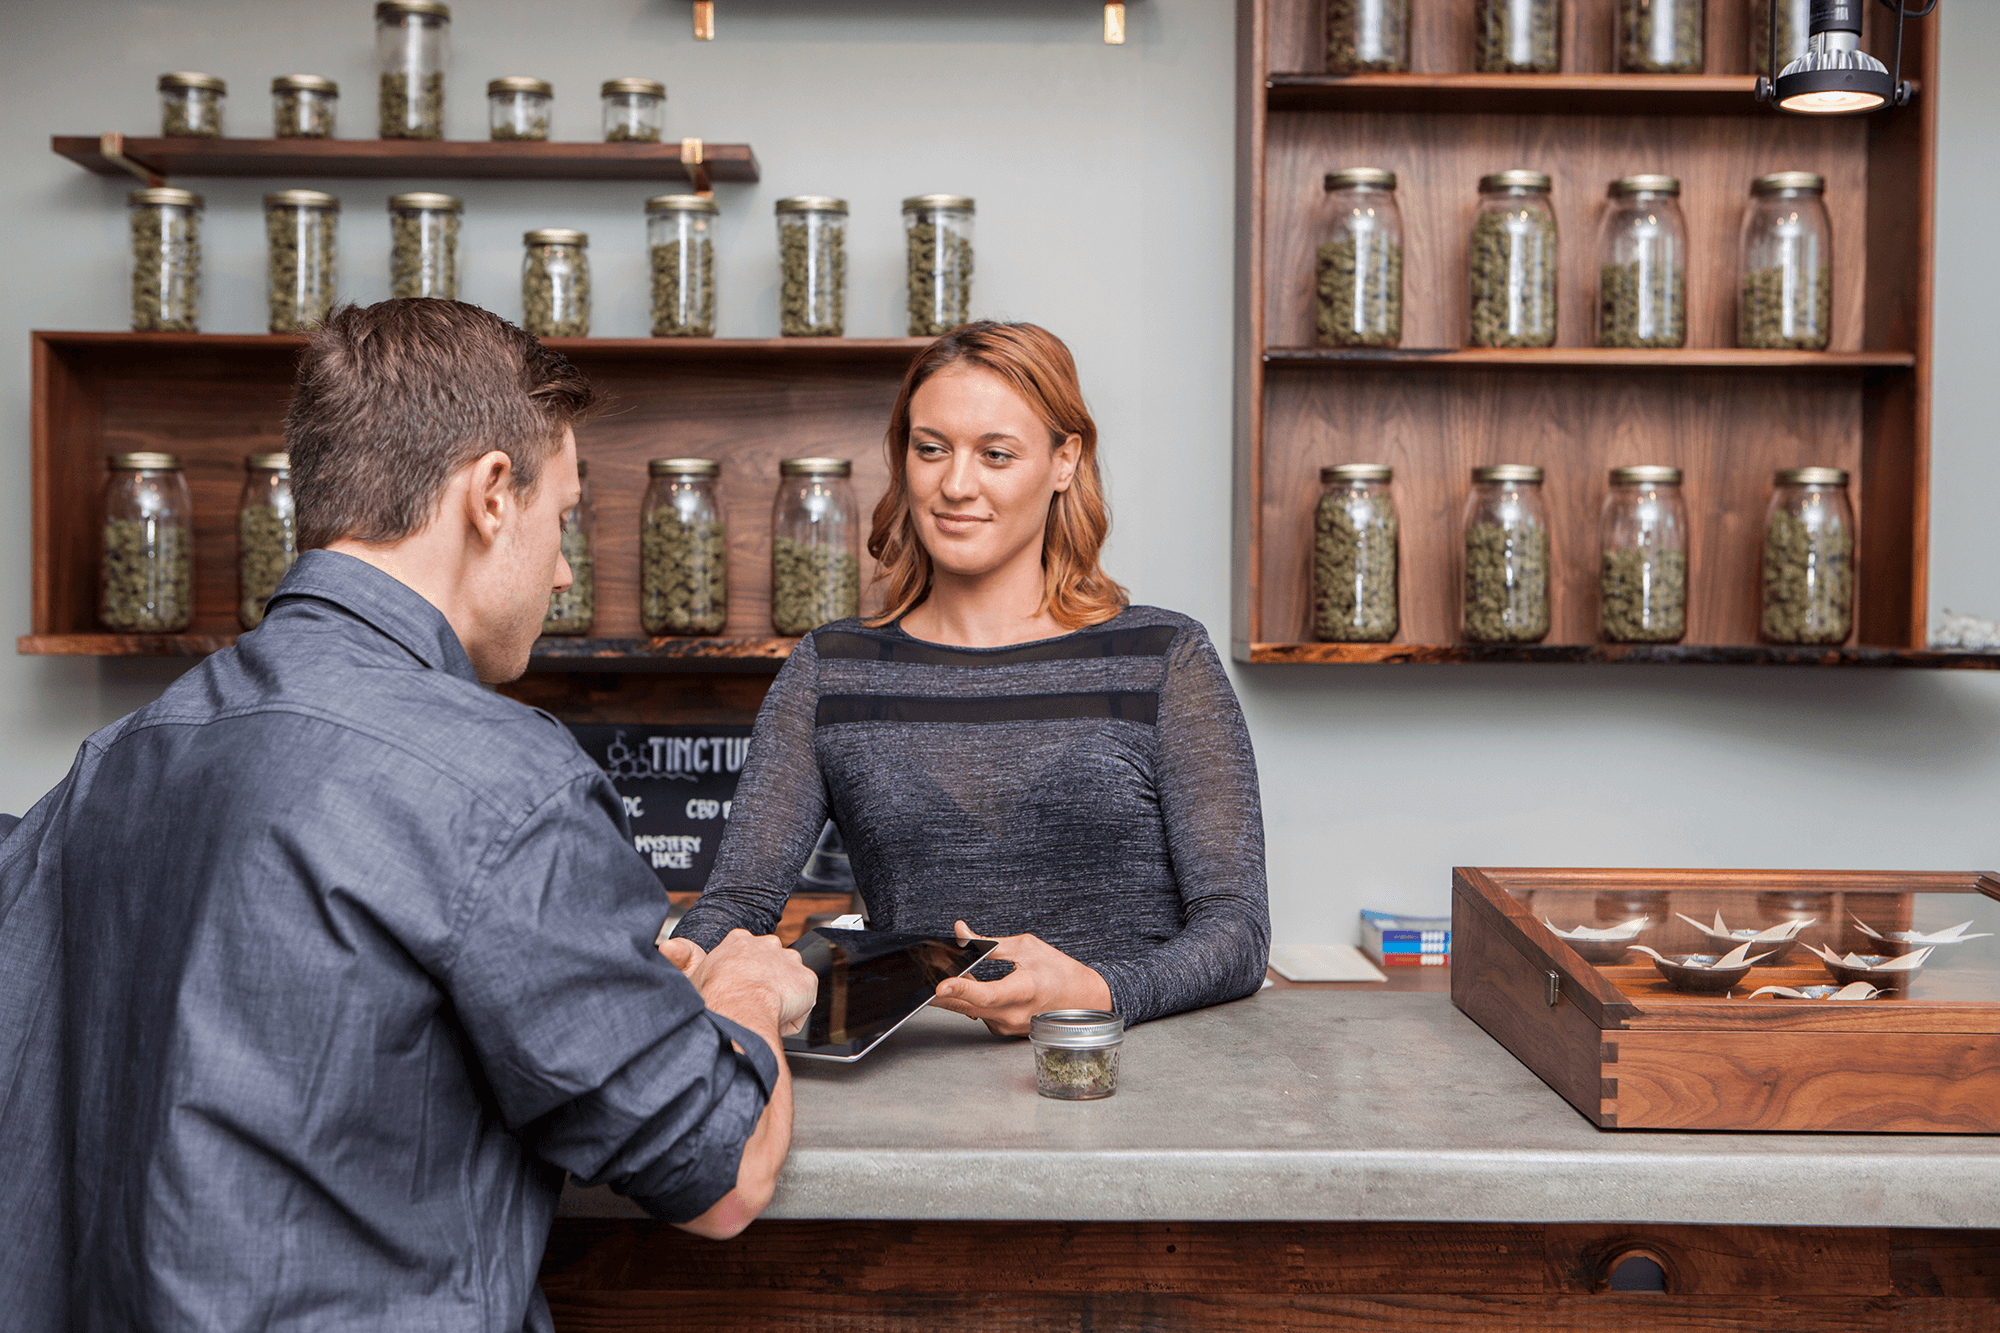 Female holding tablet while male uses it in cannabis dispensary.